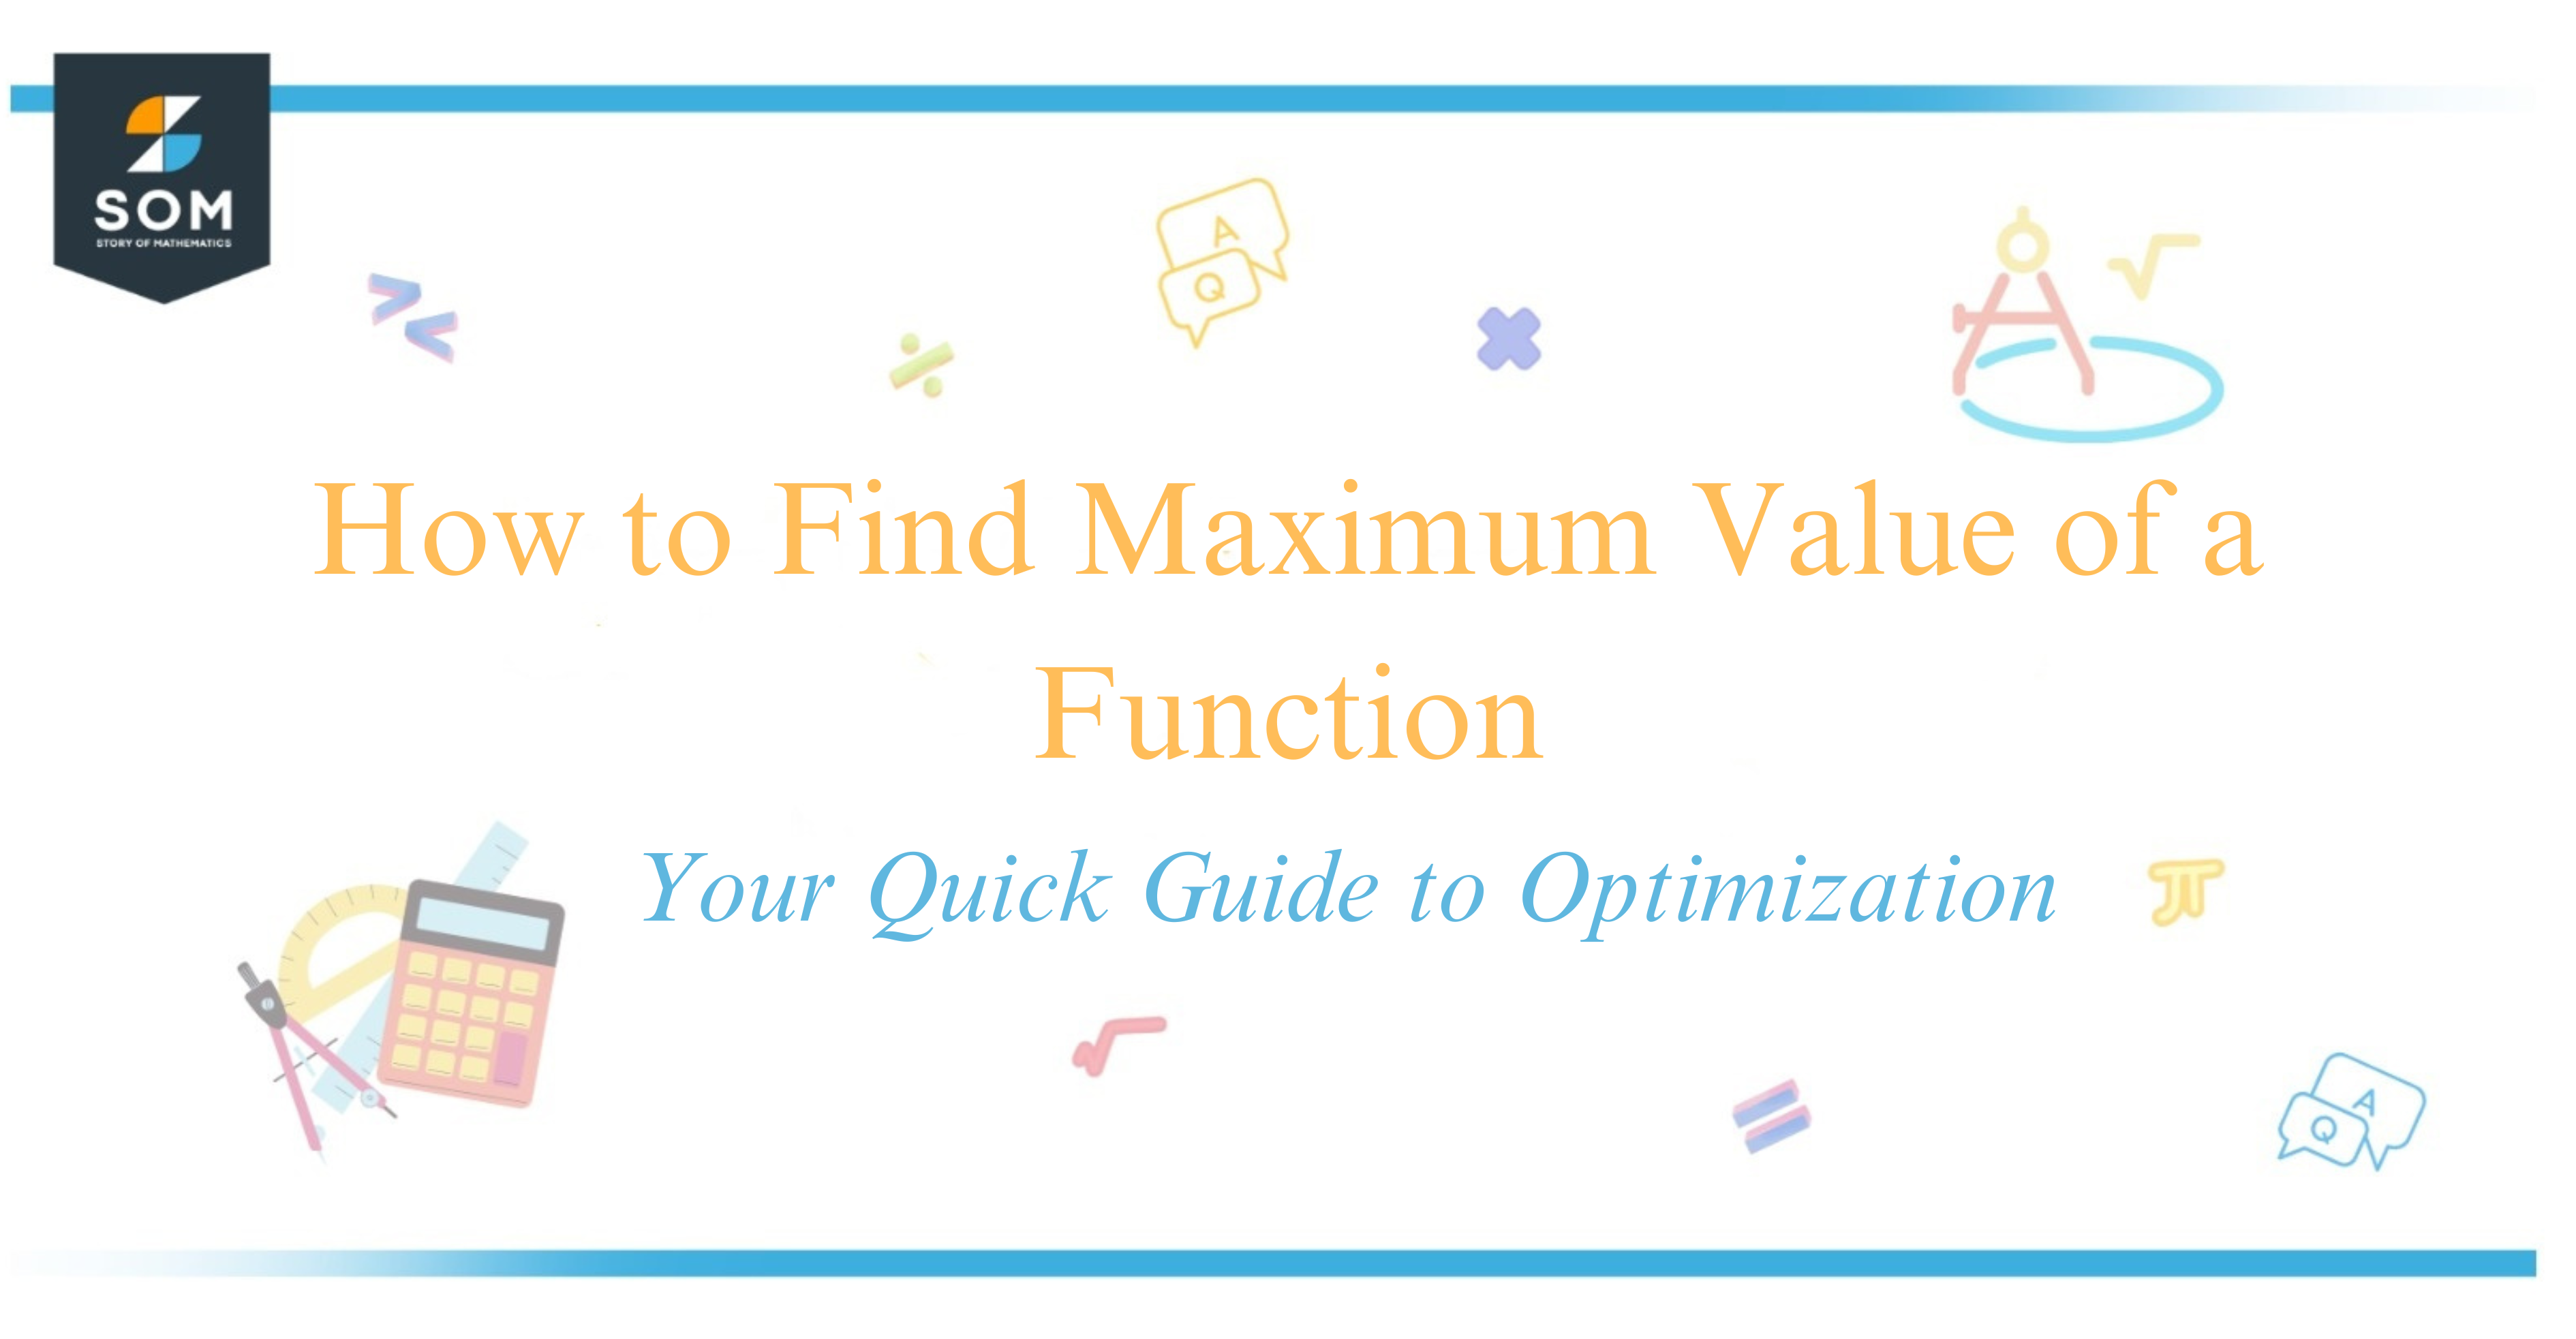 How to Find Maximum Value of a Function Your Quick Guide to Optimization